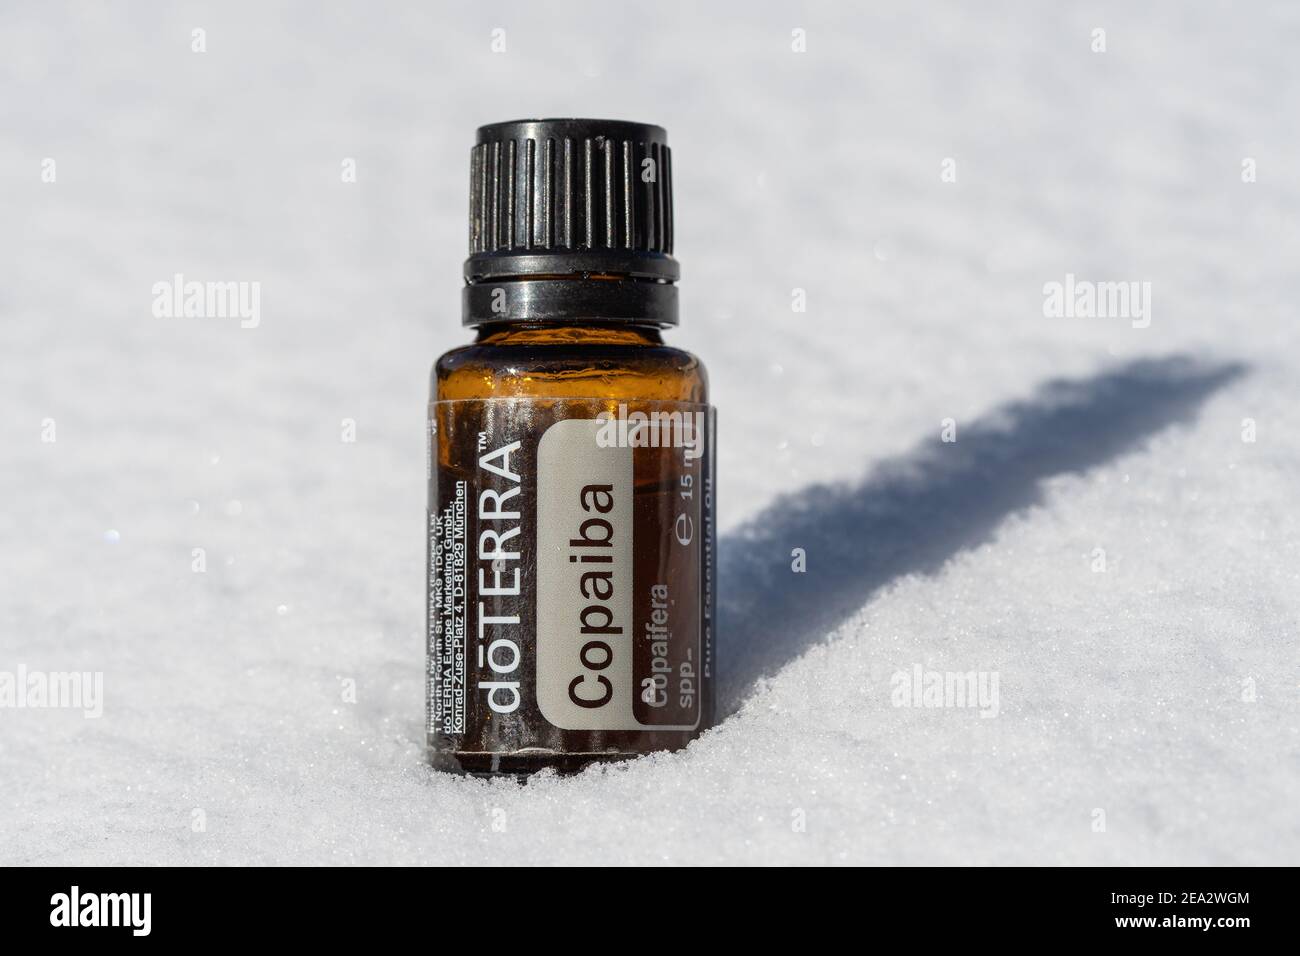 Pecs, Hungray - Jan 25 2021 - Illustrative editorial image of Doterra Essential Oils for everyday use Stock Photo